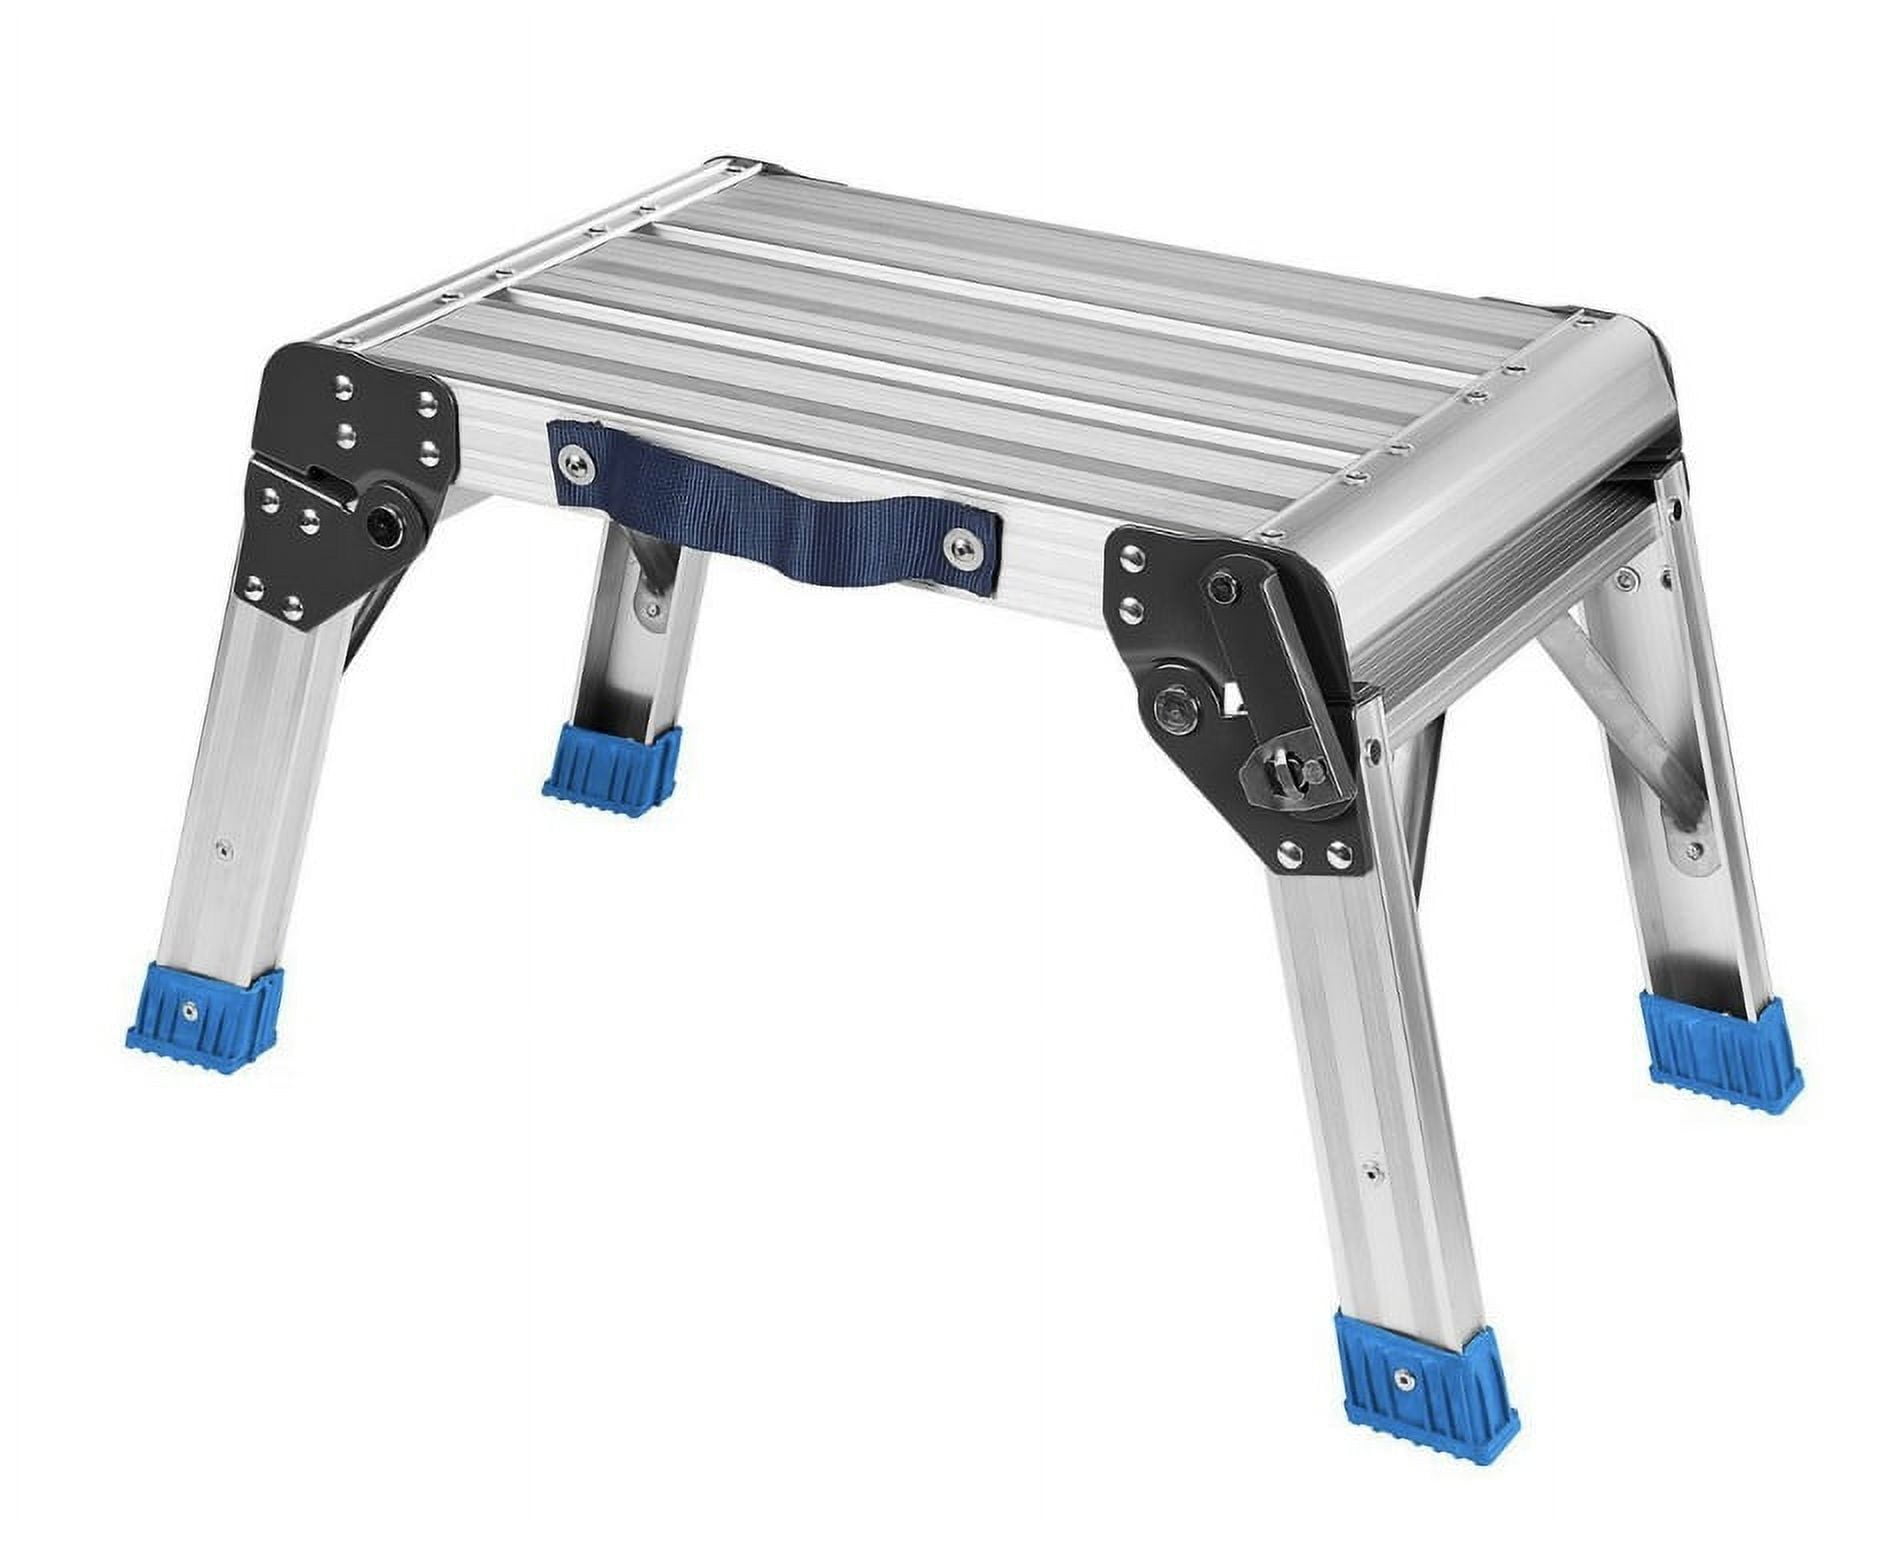 Great little 3 step stool for accessing your TV roof - Mechanical